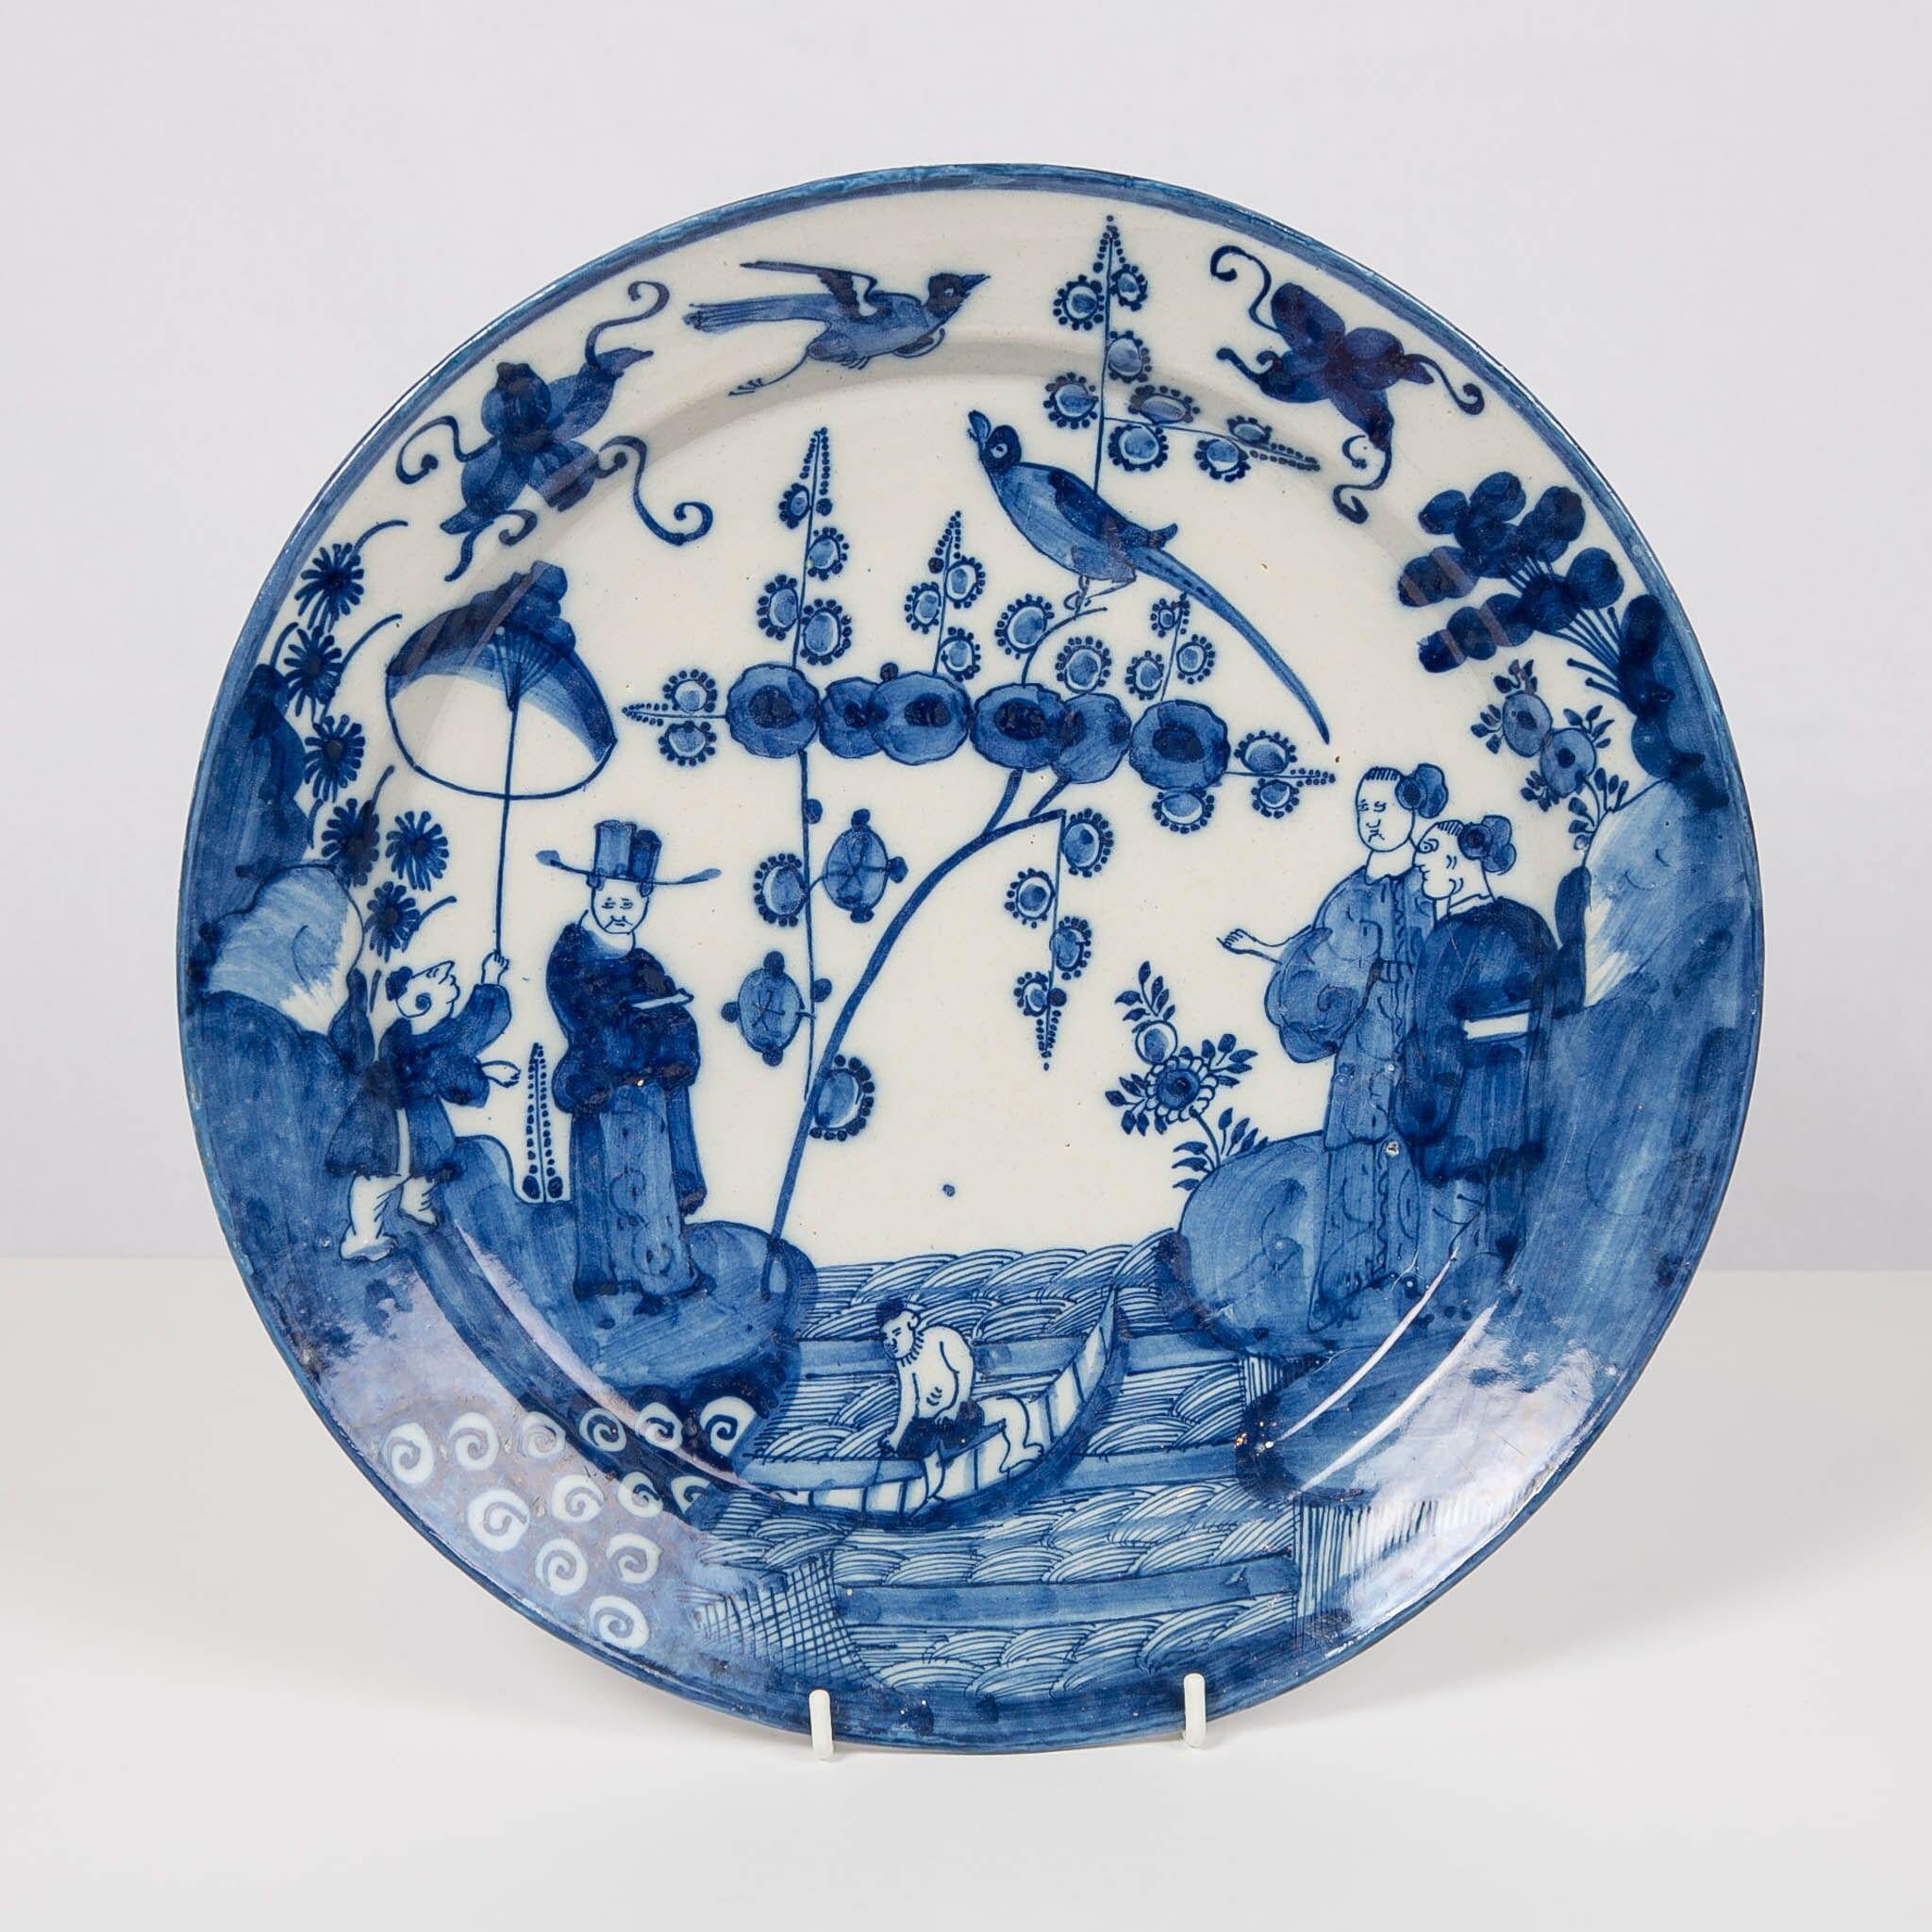 We are proud to offer this pair of large and particularly decorative delft chargers hand painted in cobalt blue and white. The design is distinctive in its decoration which features a chinoiserie scene covering the entire dish. This borderless